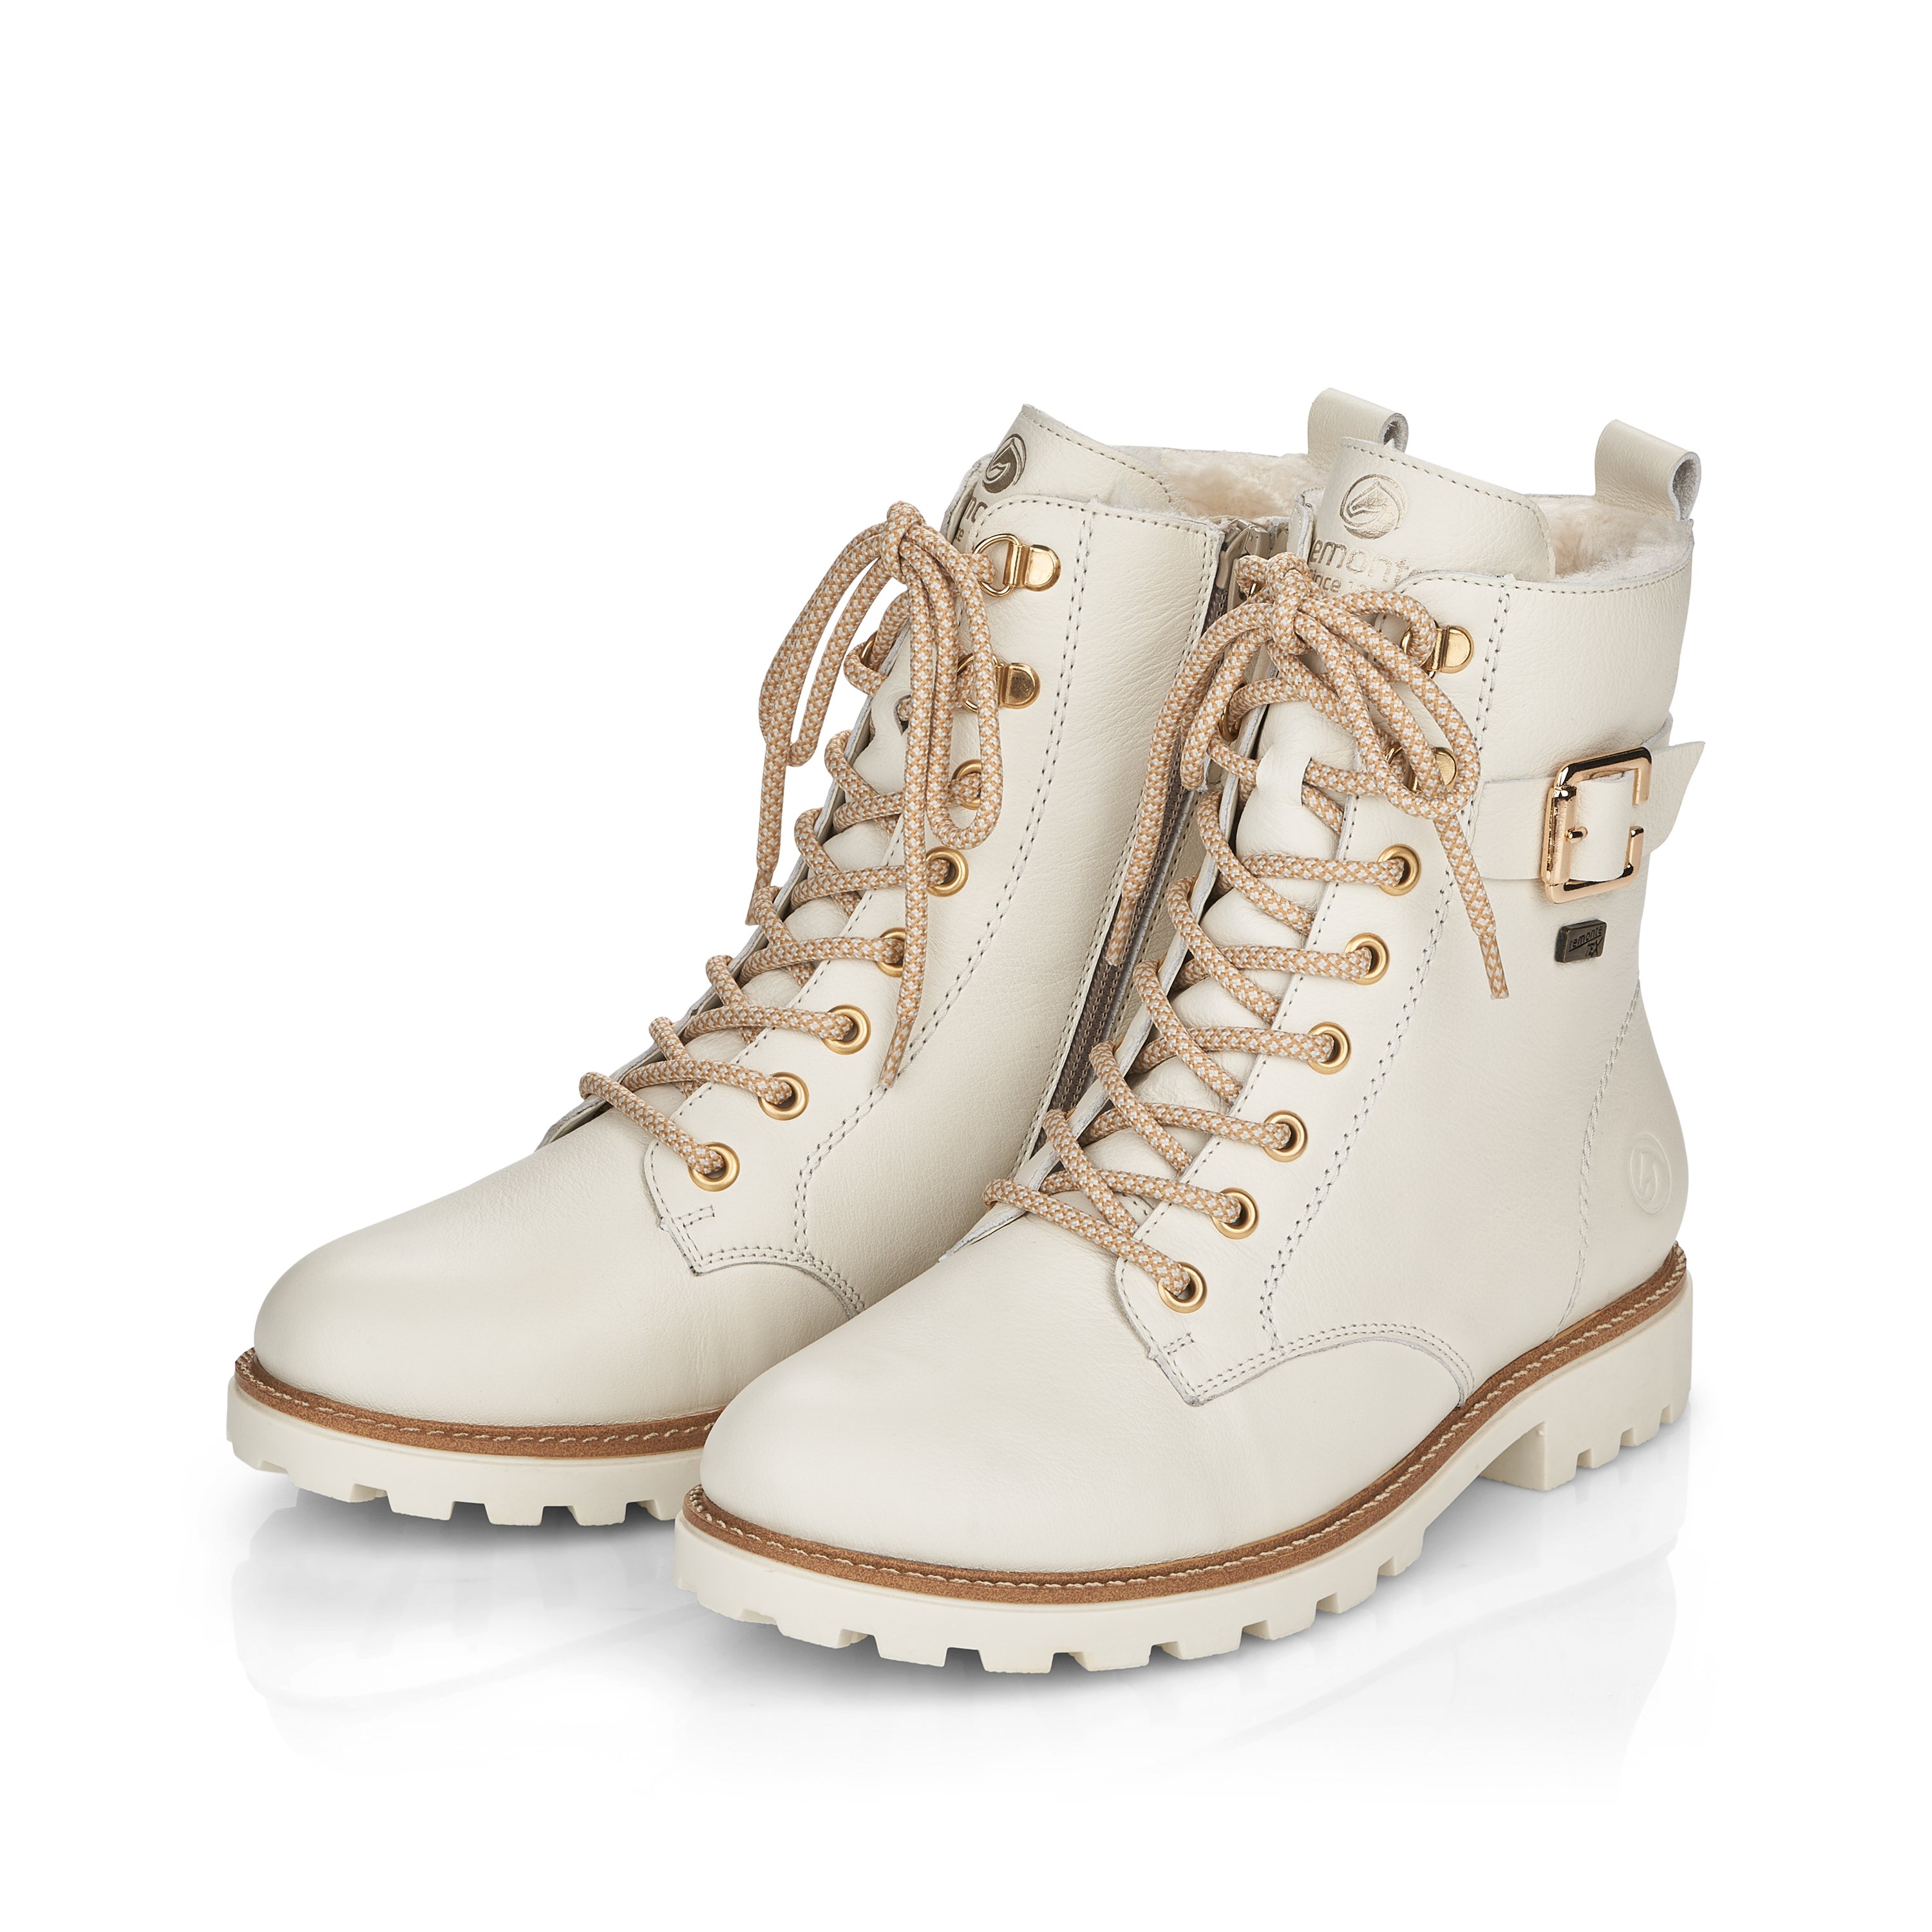 Off-white remonte women´s lace-up boots D8475-80 with flexible profile sole. Shoe laterally